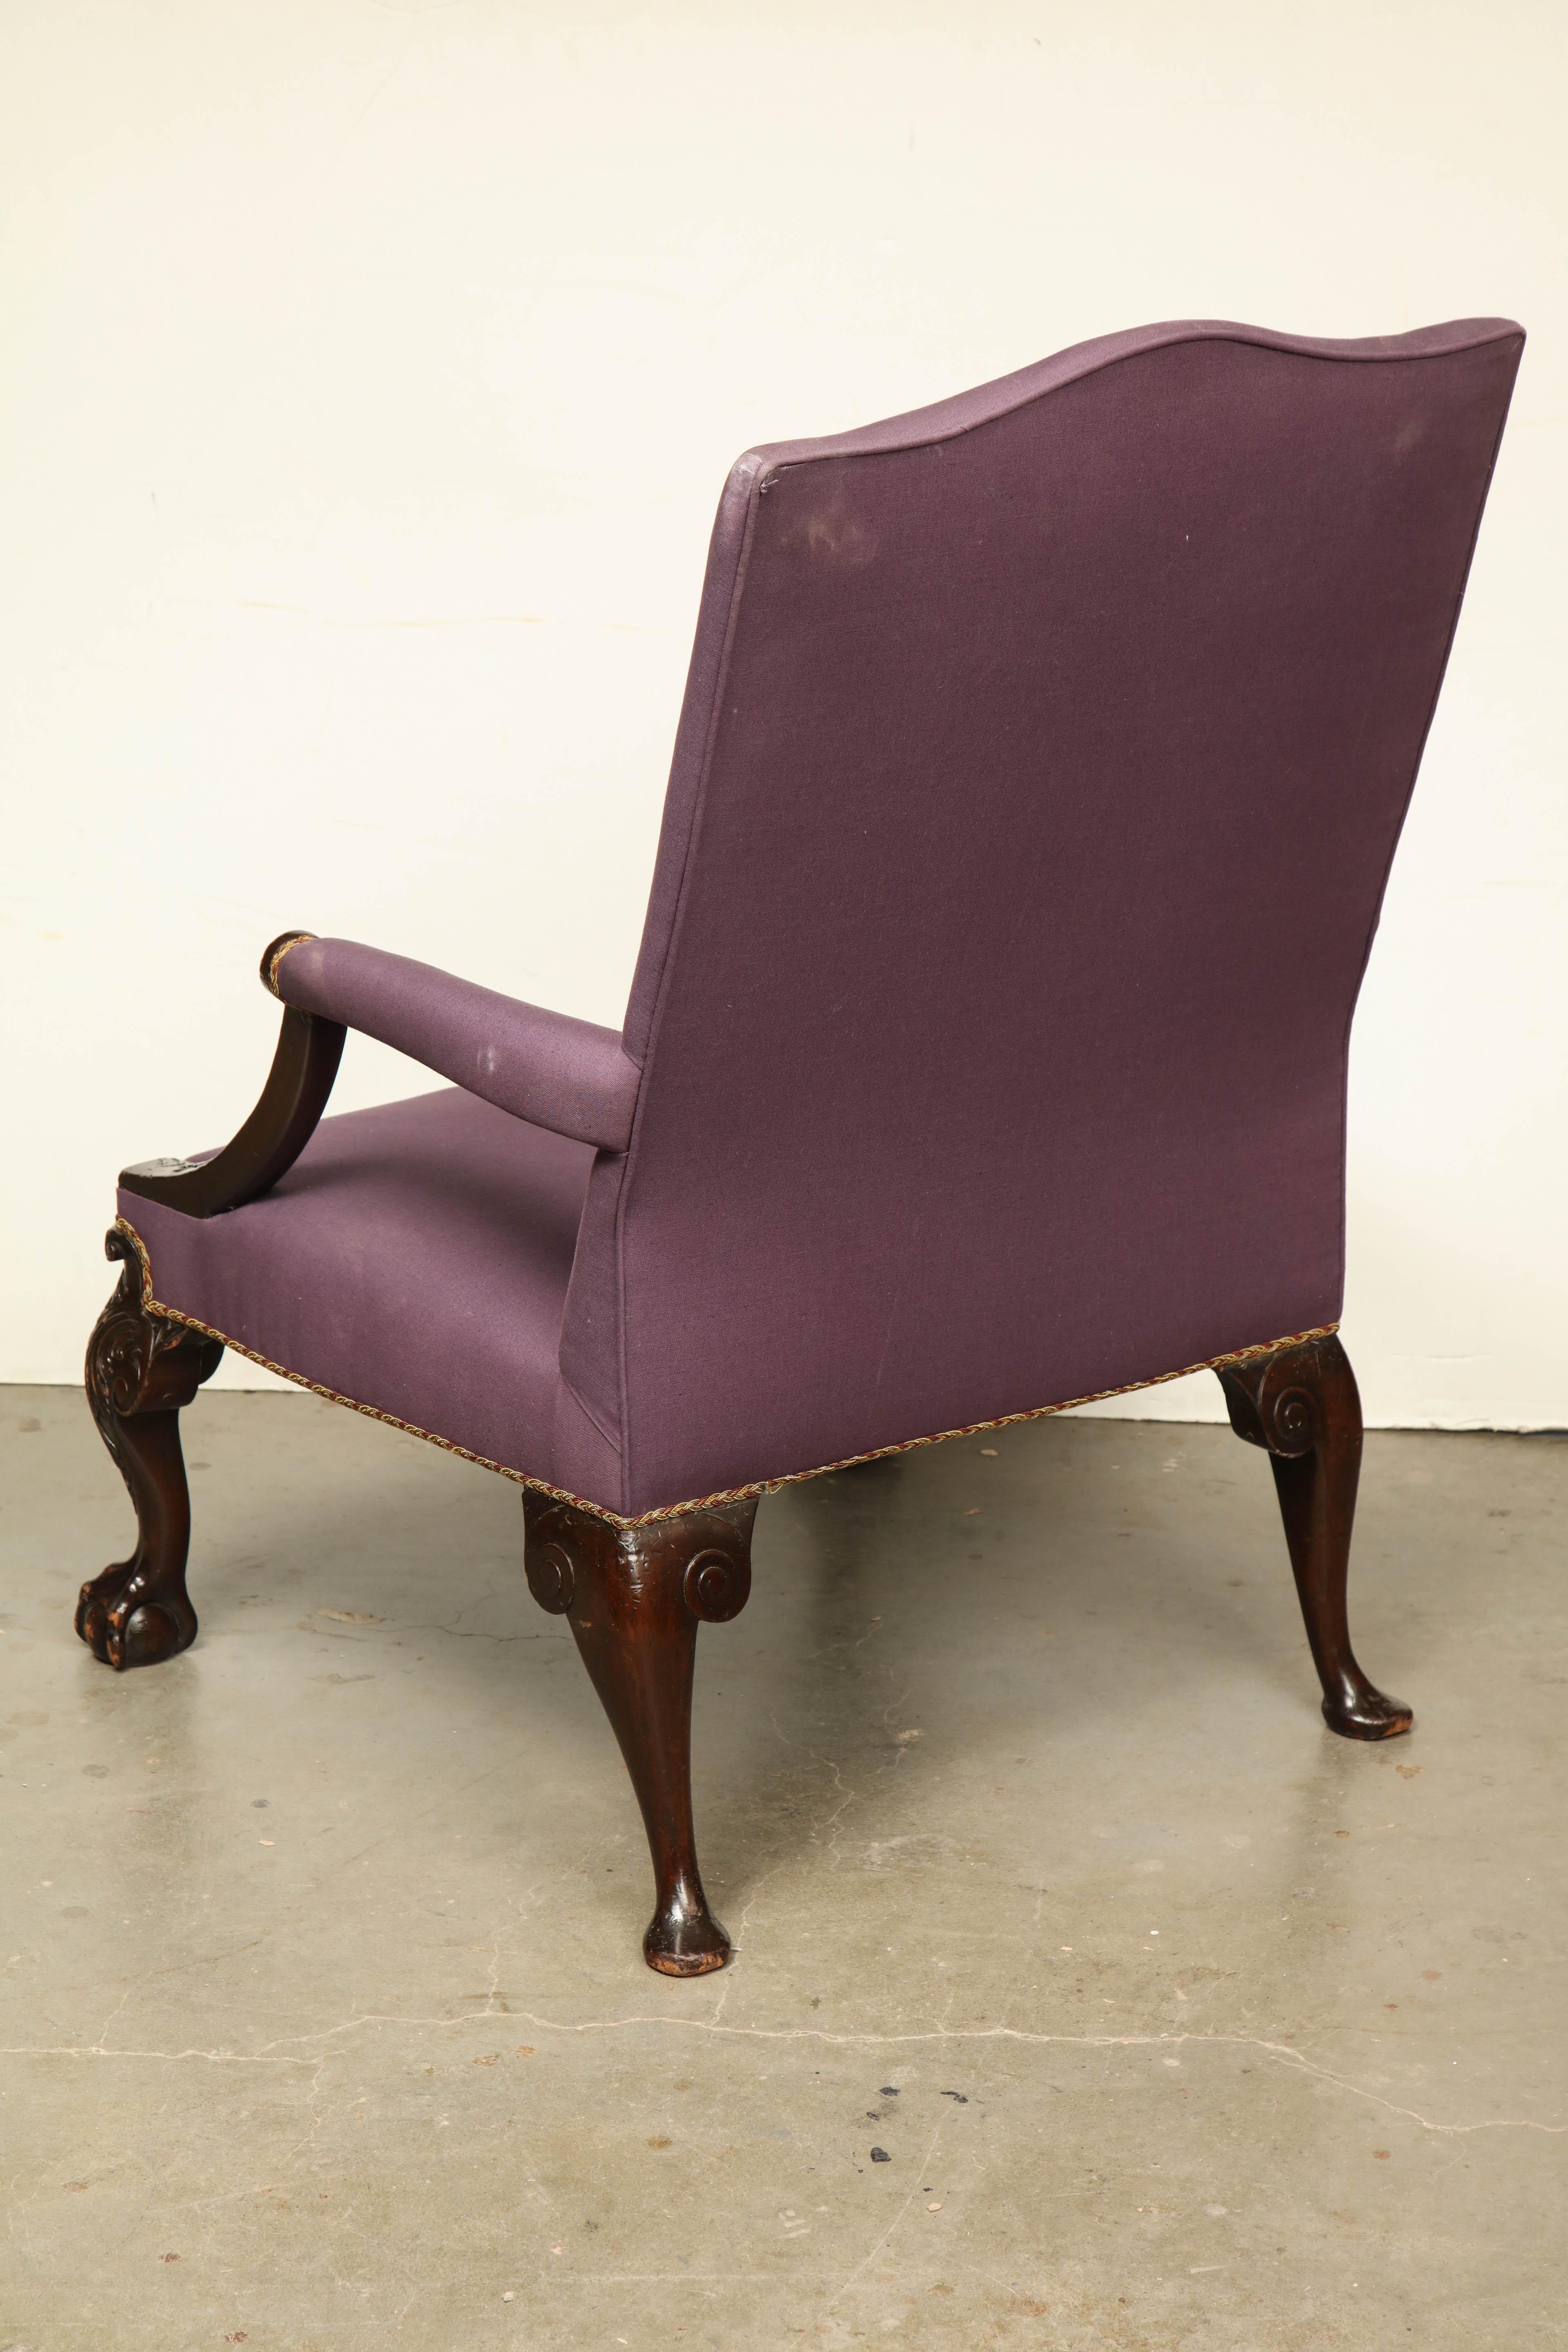 Late 18th Century George II Ball and Claw Foot Gainsborough Armchair